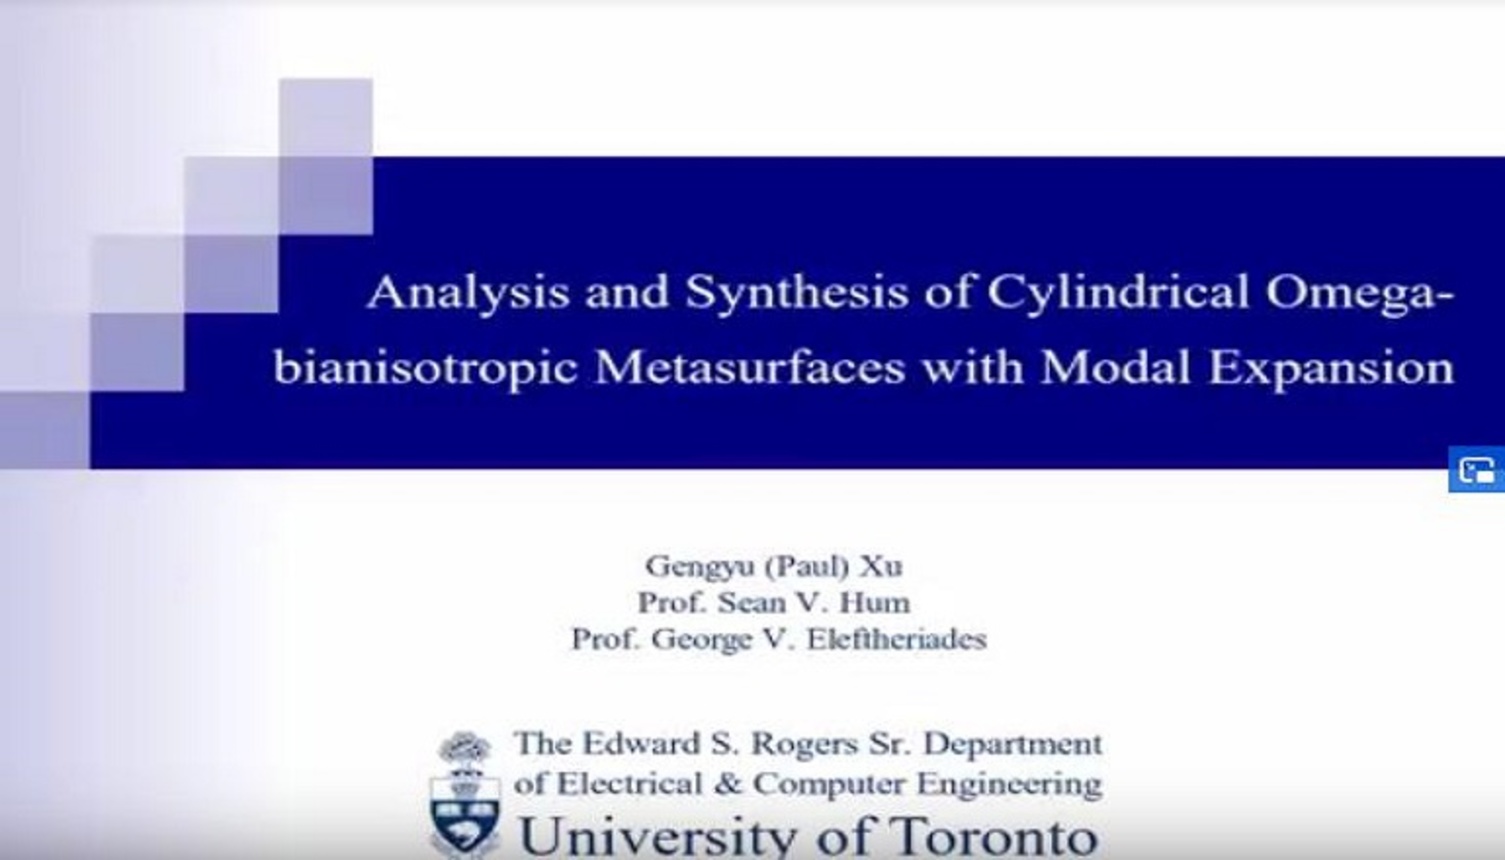 Analysis and Synthesis of Cylindrical Omega-Bianisotropic Metasurfaces with Mode Expansion Video